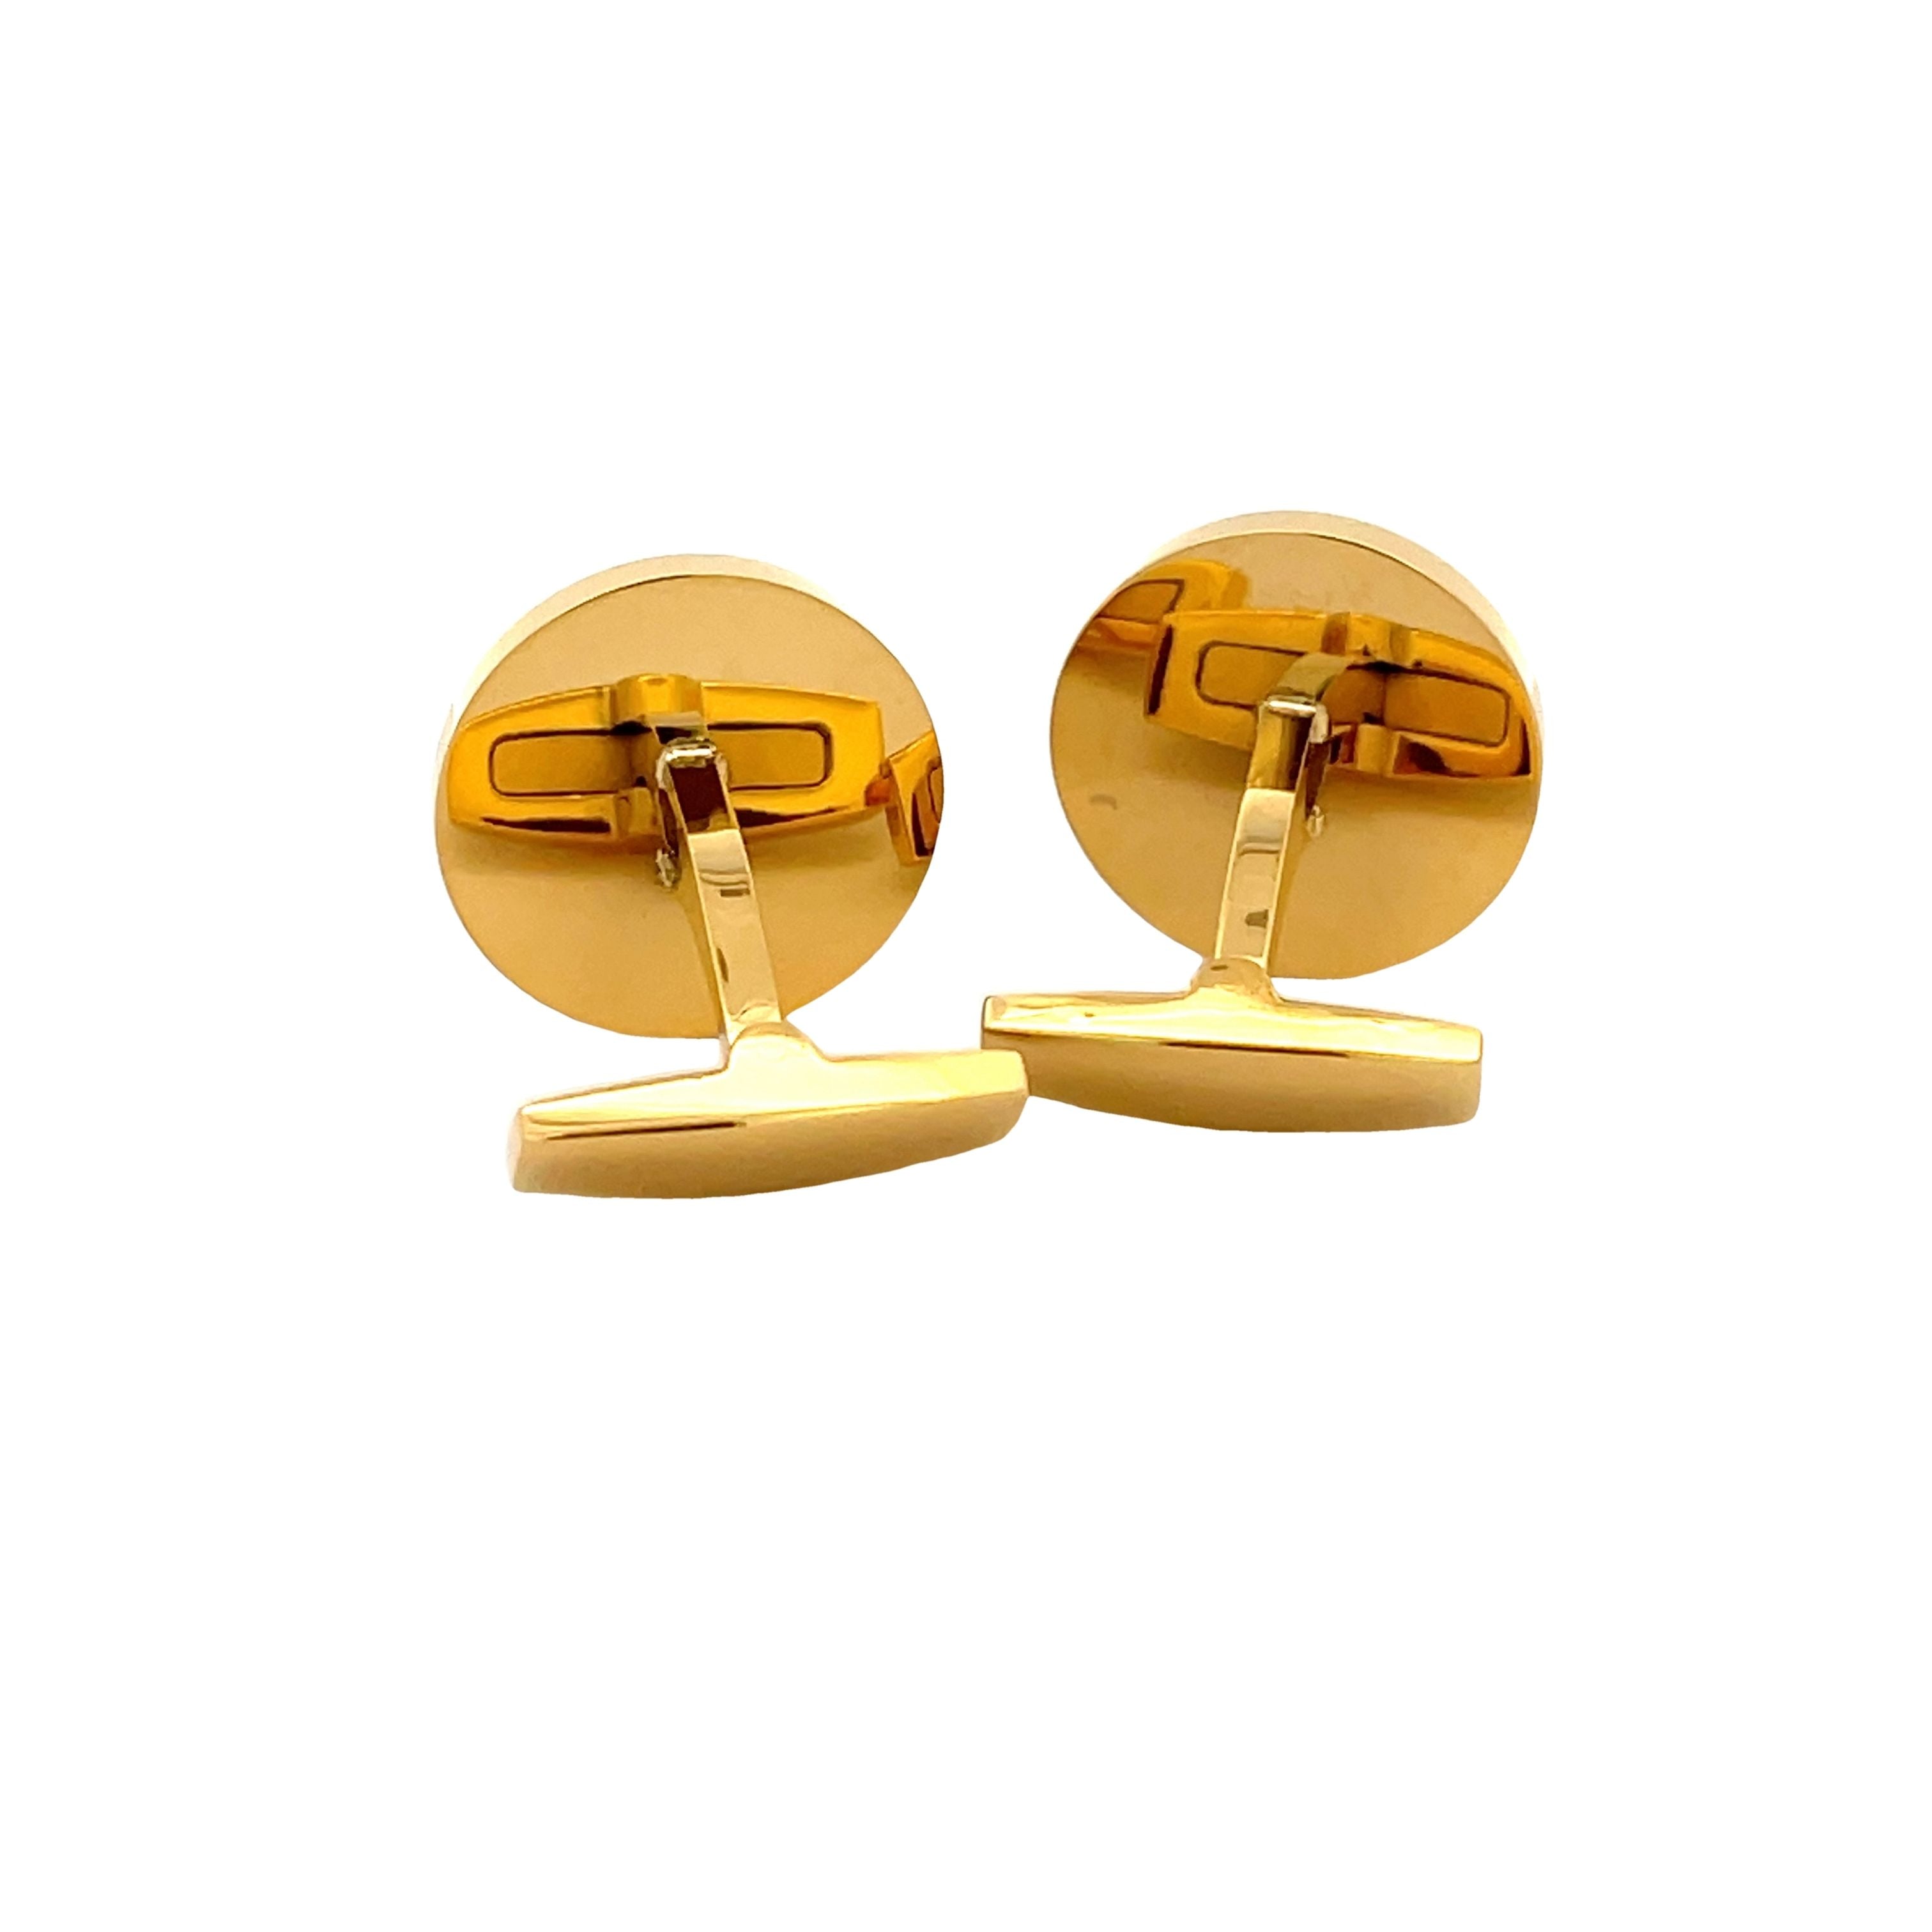 Gold Plated Stainless Steel White Mother Of Pearl Round Cufflinks